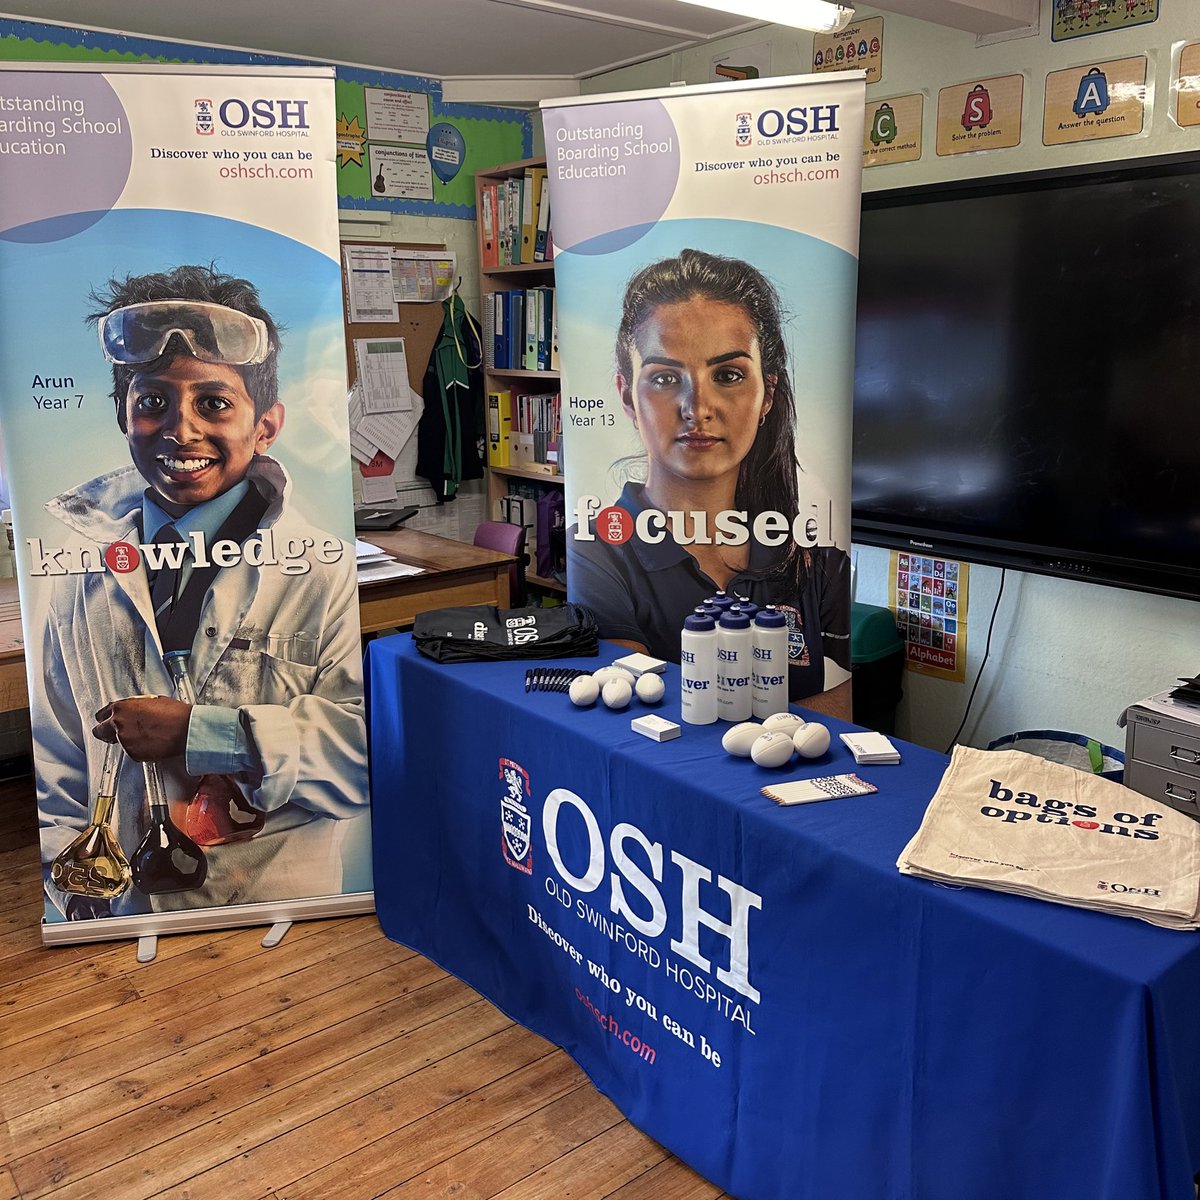 Delighted to be at @RuckleighSchool this evening and looking forward to meeting students at their Senior Schools Fair #secondaryschools #stateboarding